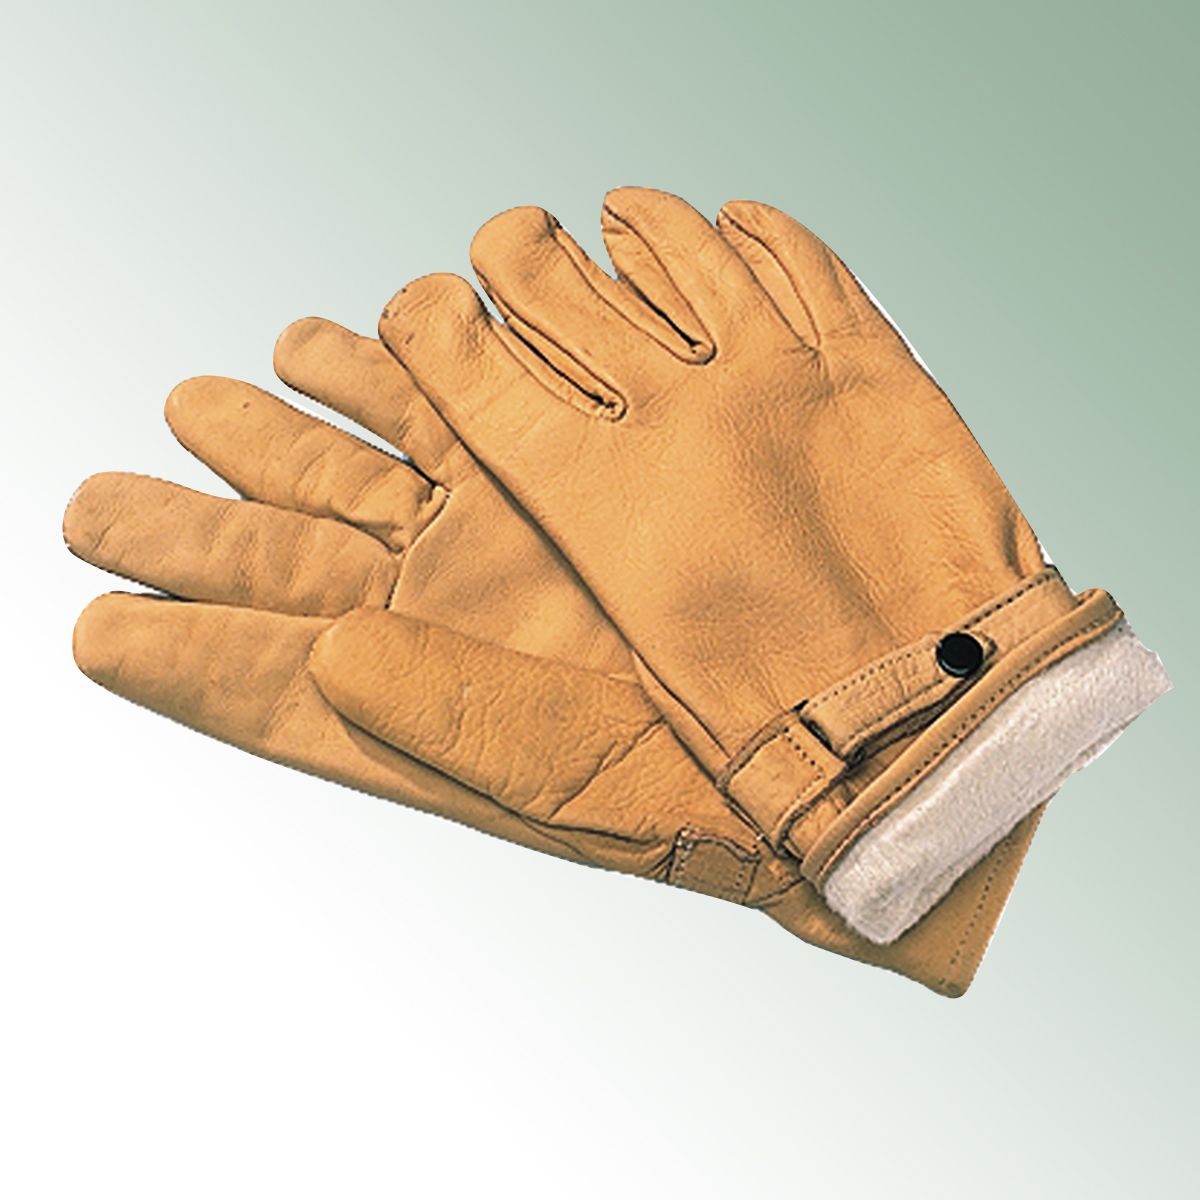 Leather glove Sweden made from calf leather with molleton cloth lining